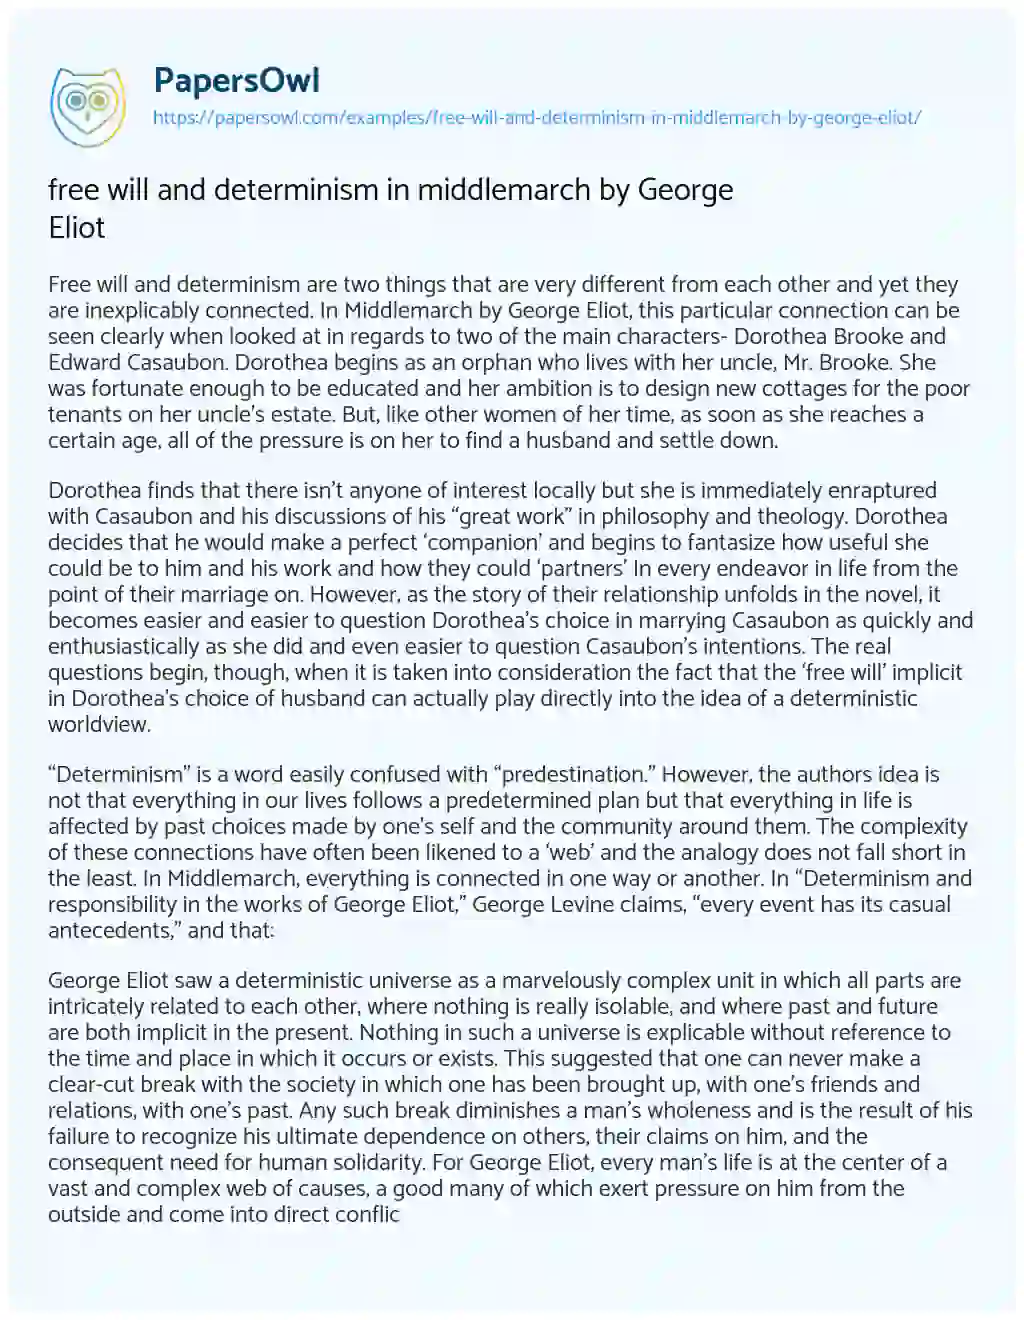 Essay on Free Will and Determinism in Middlemarch by George Eliot